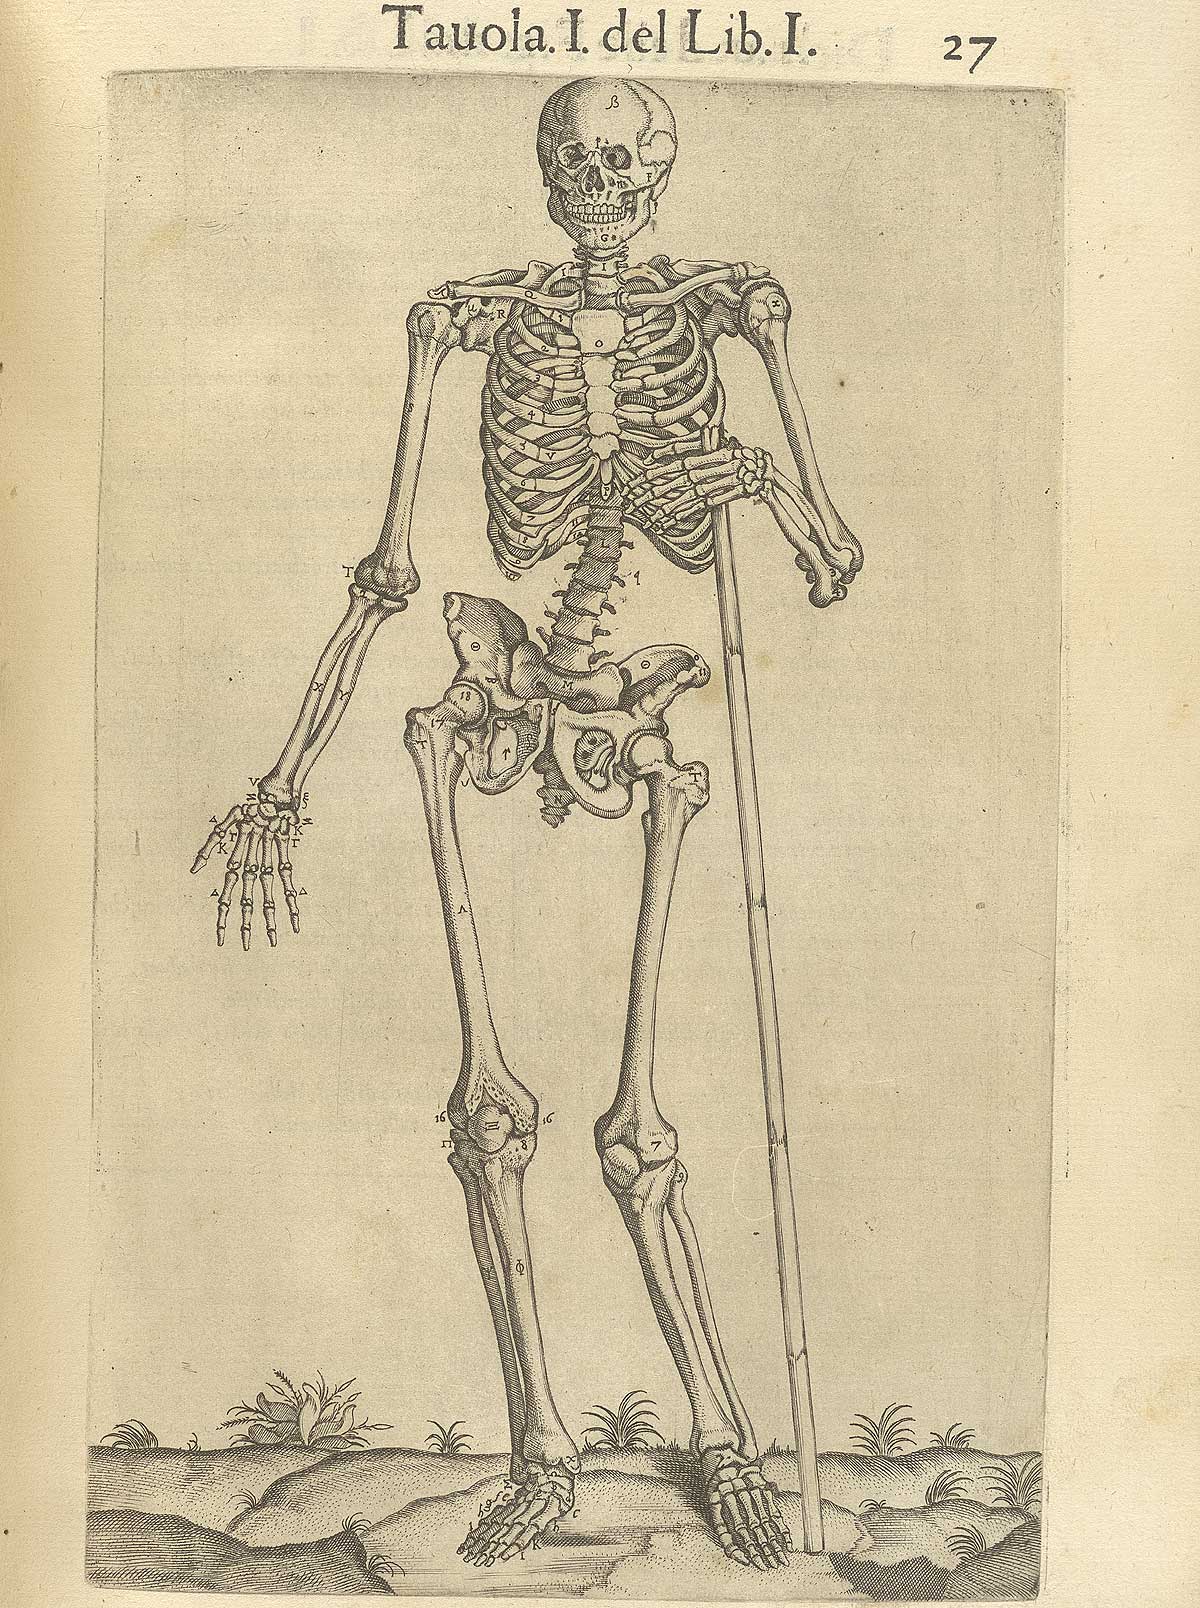 Page 27 of Juan Valverde de Amusco's Anatomia del corpo humano, featuring a skeleton is standing while holding a stick in its left hand.